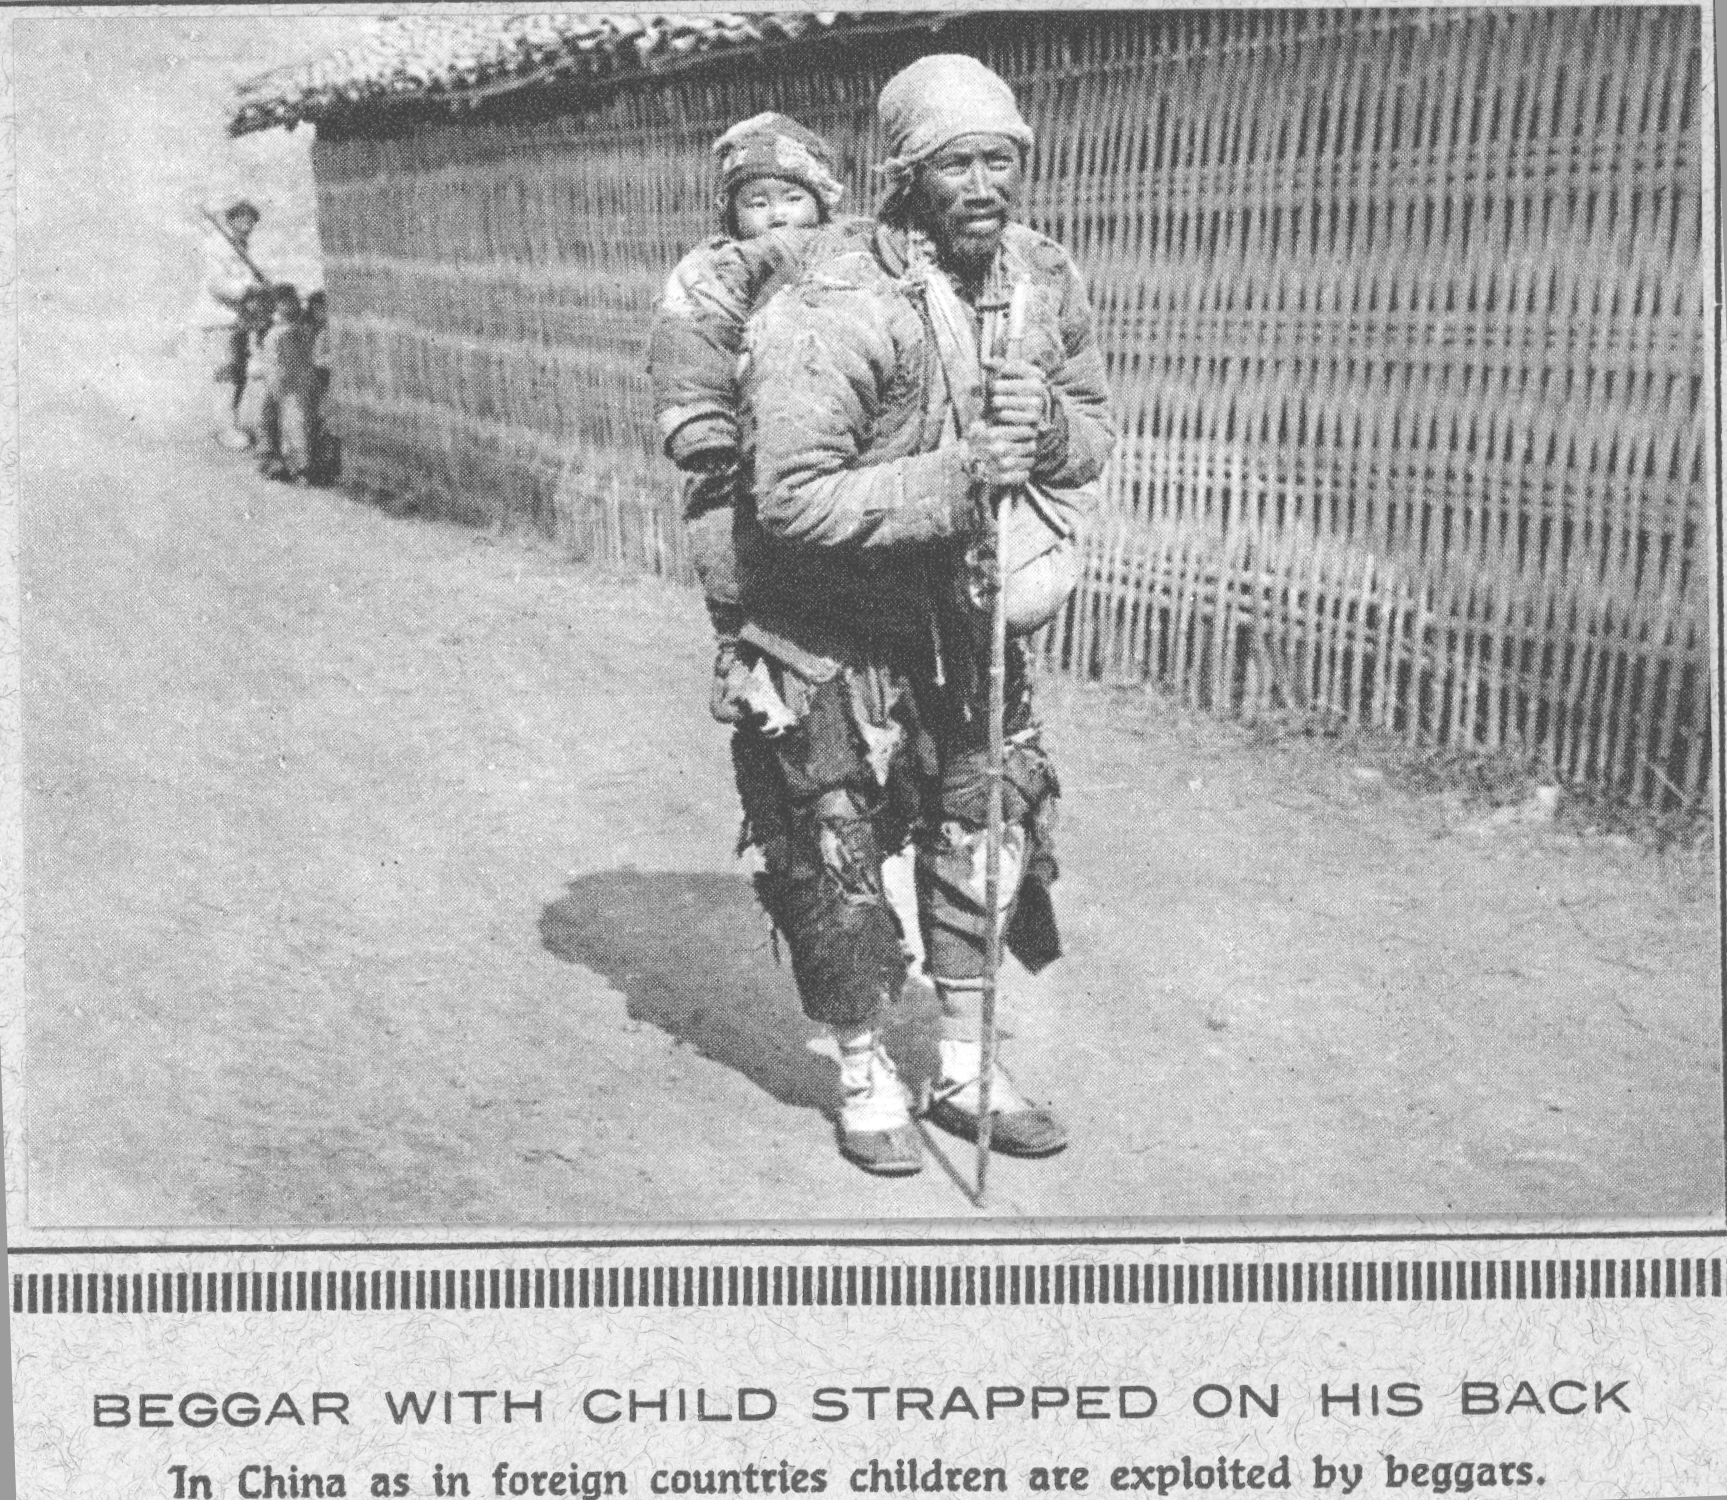 Beggar with child strapped on his back